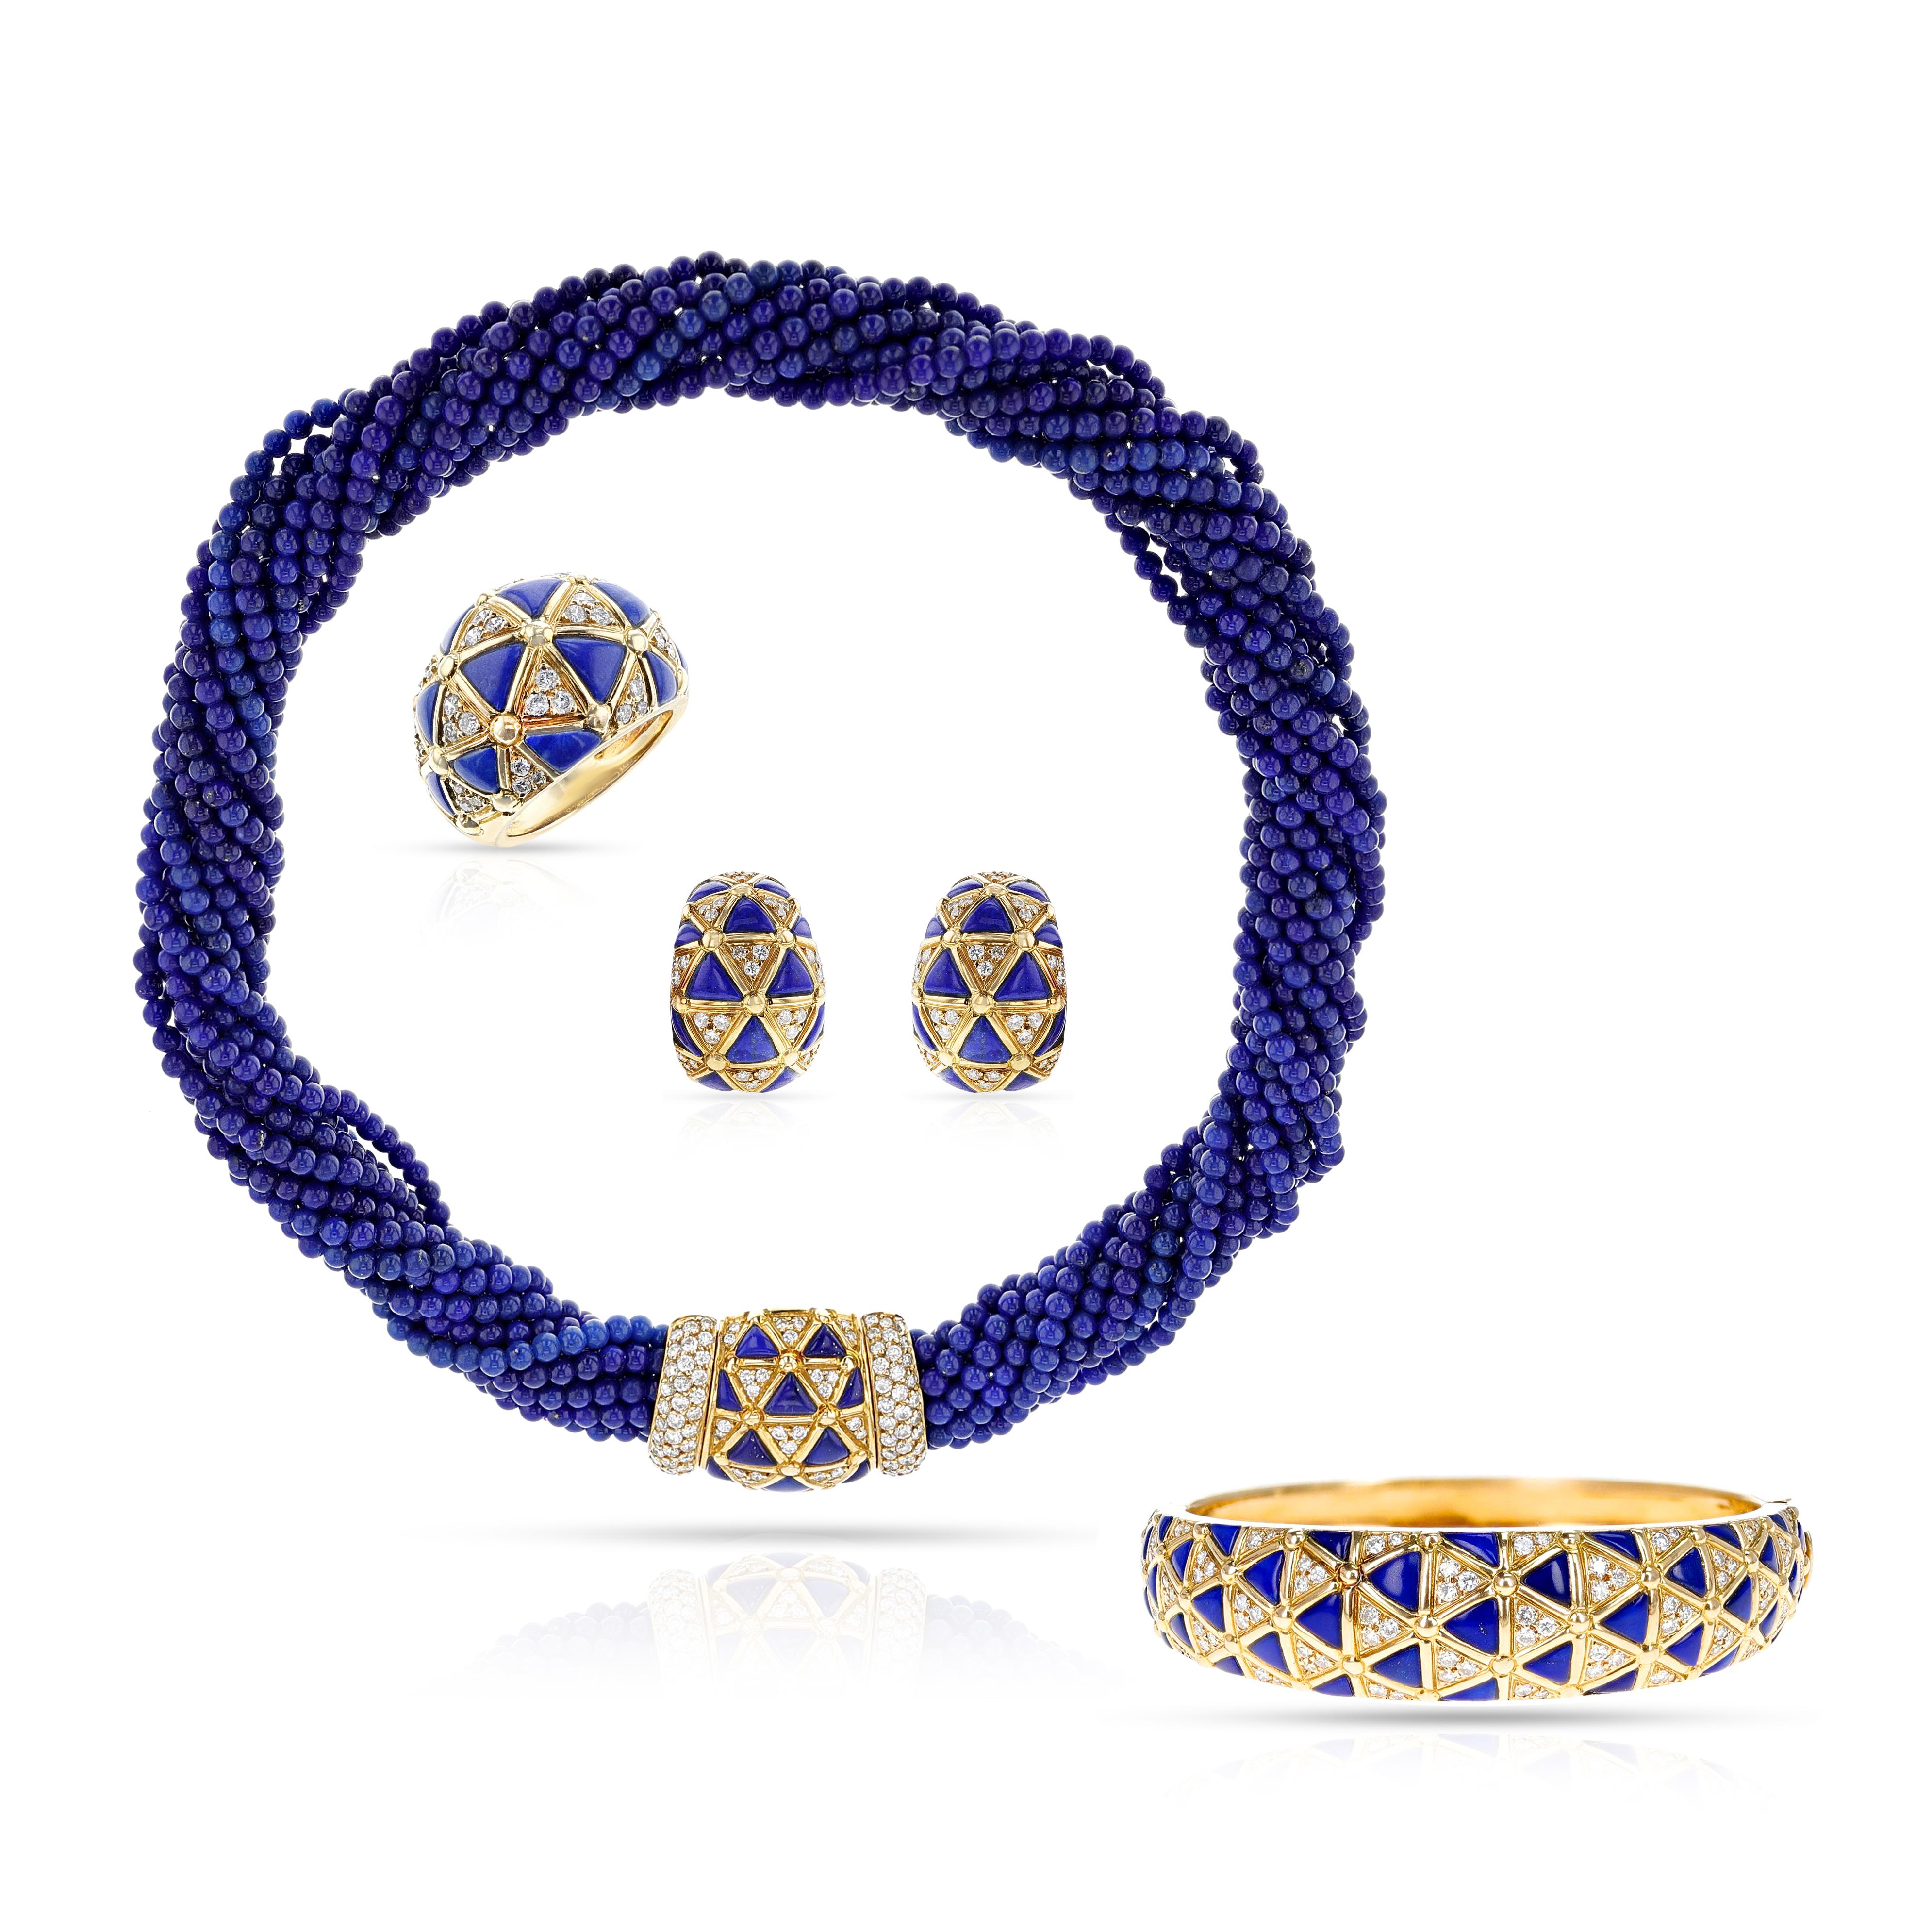 Round Cut Van Cleef & Arpels French Lapis Lazuli & Diamond Necklace, Earring, Ring, Bangle